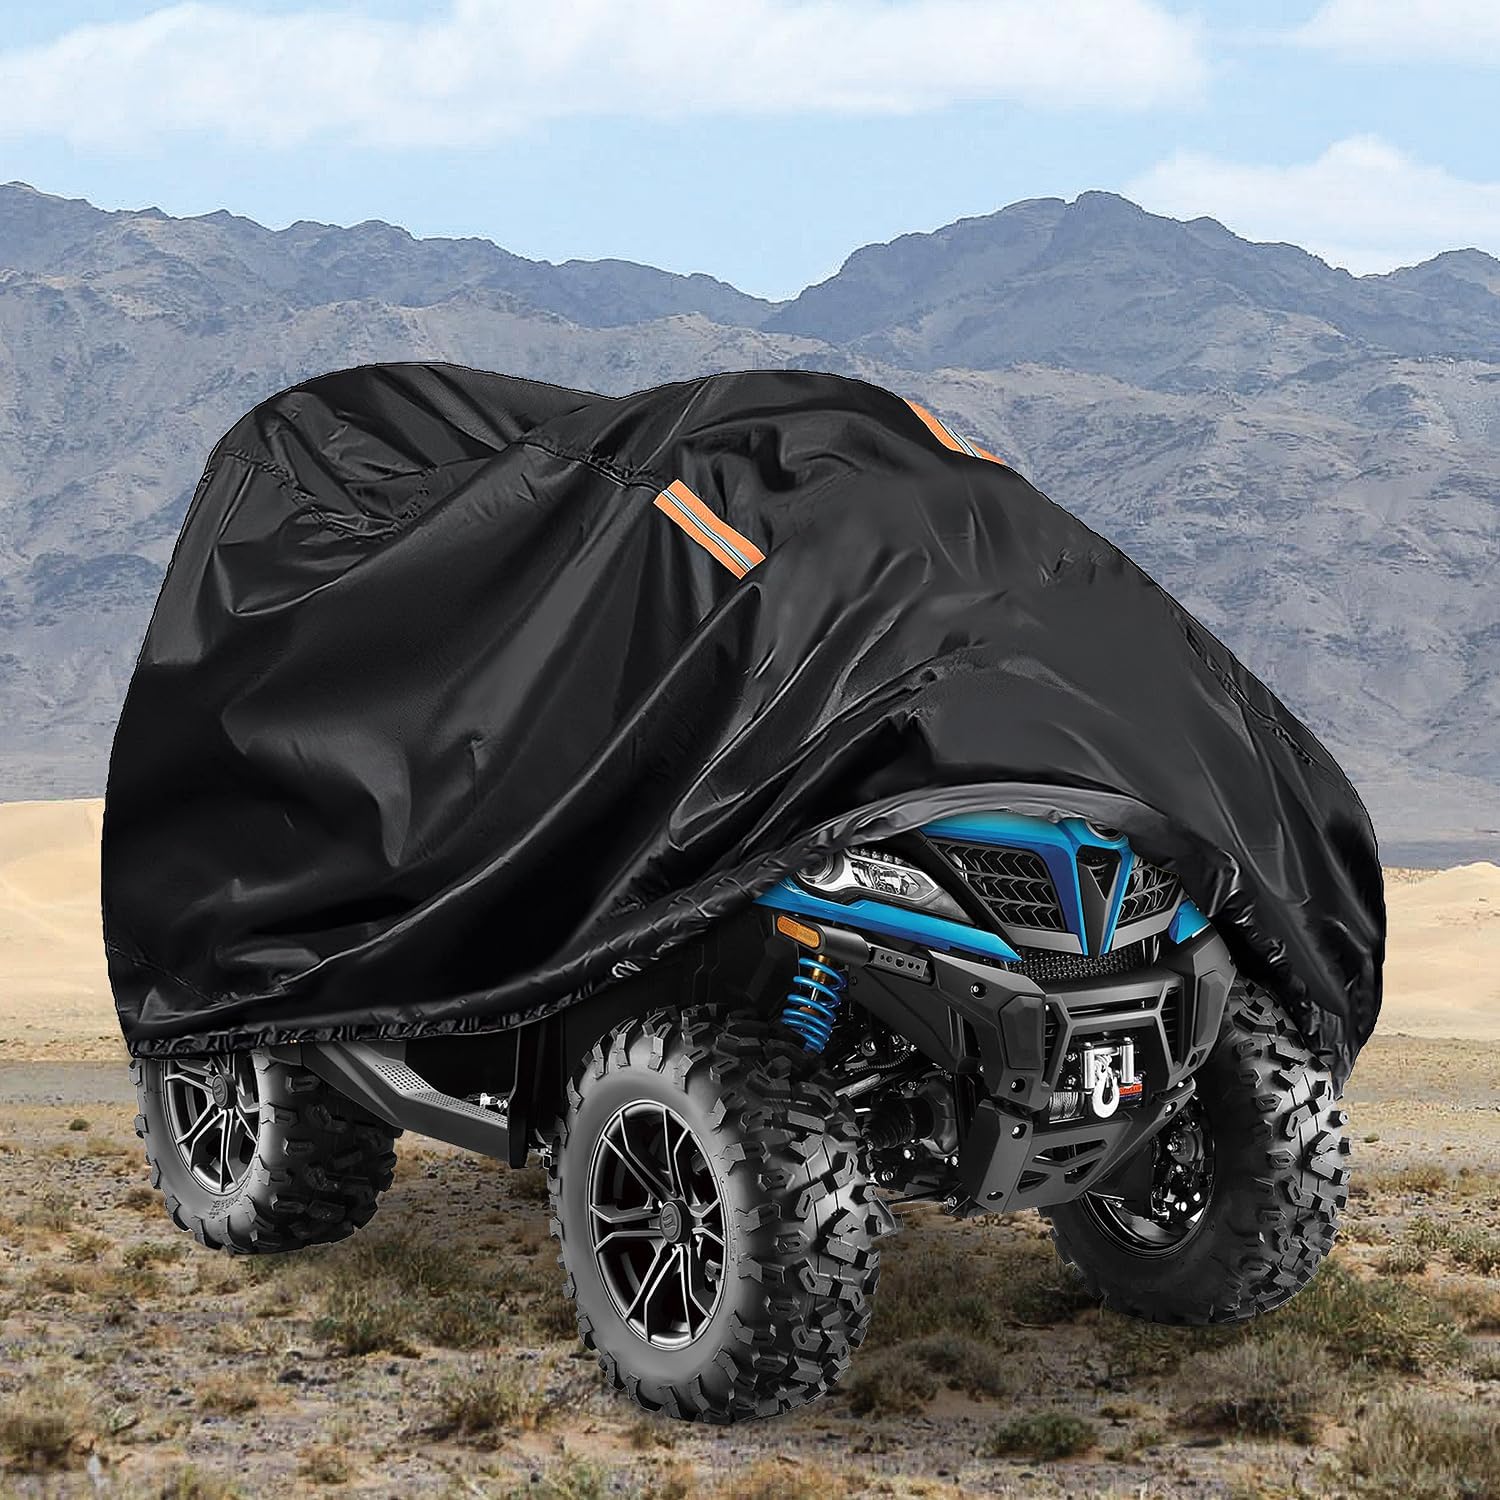 ATV Cover Waterproof 420D Heavy Duty Ripstop Material Black Protects 4 Wheeler from Snow Rain All Season All Weather UV Protection Fits up to 86" Nilight